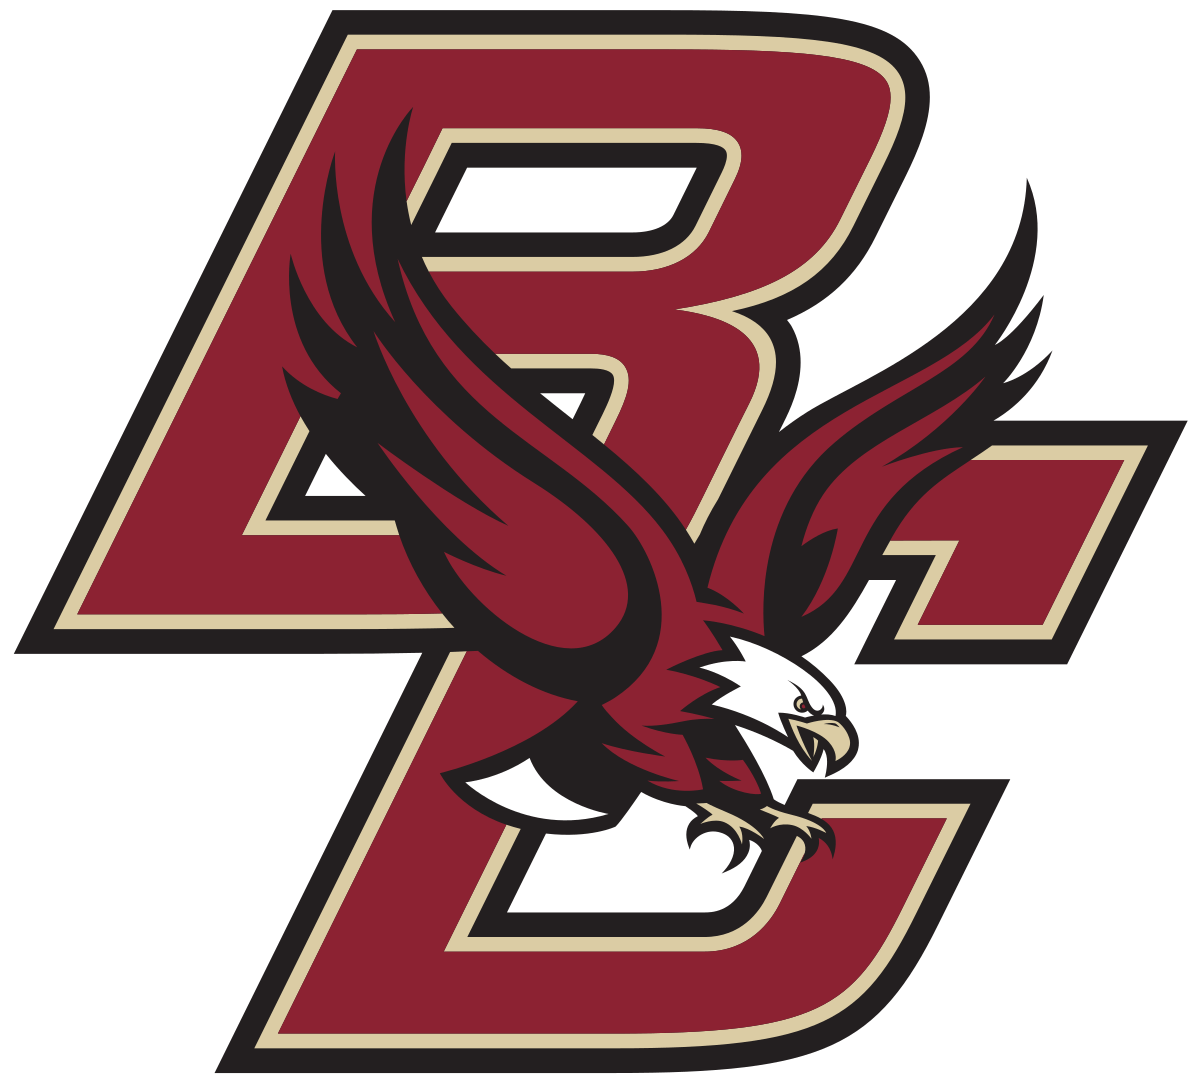 Newspaper with Red Eagle Logo - Boston College Eagles